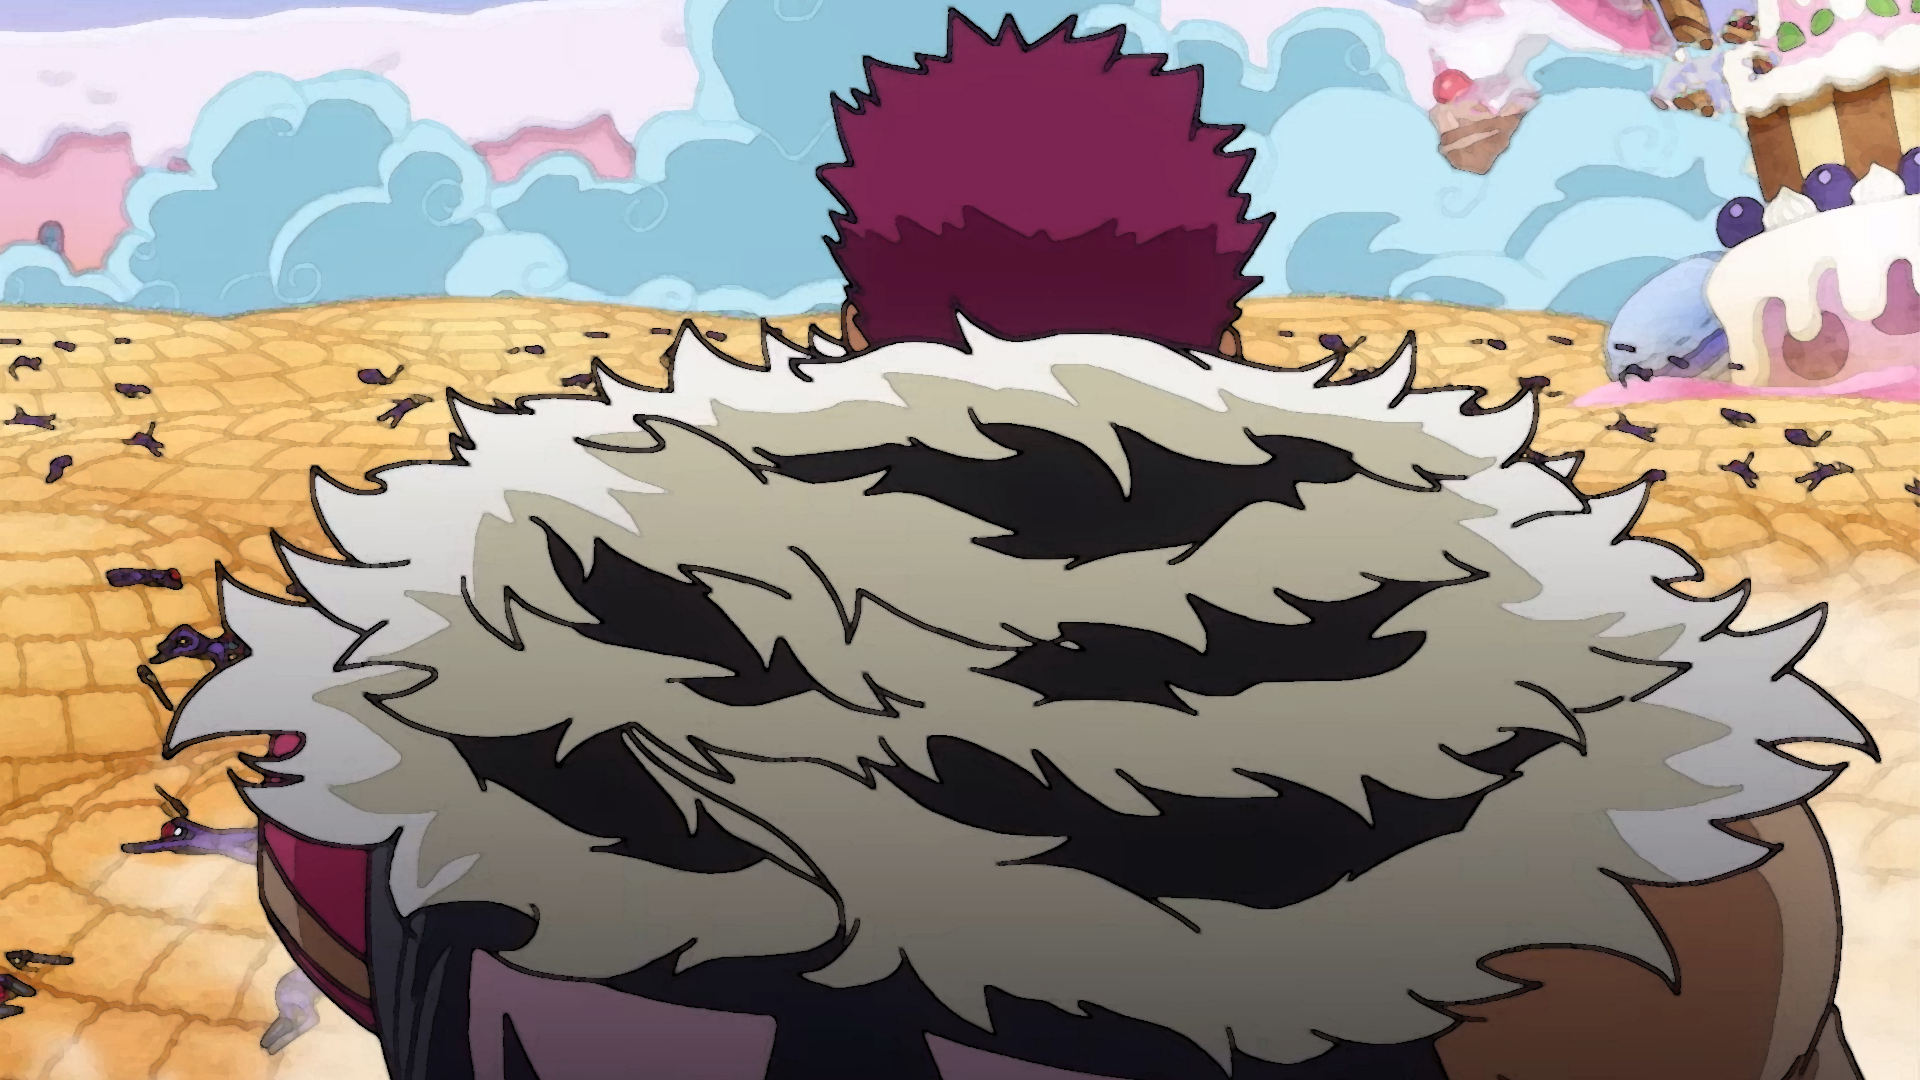 9 Charlotte Katakuri Wallpapers for iPhone and Android by Elizabeth Guzman